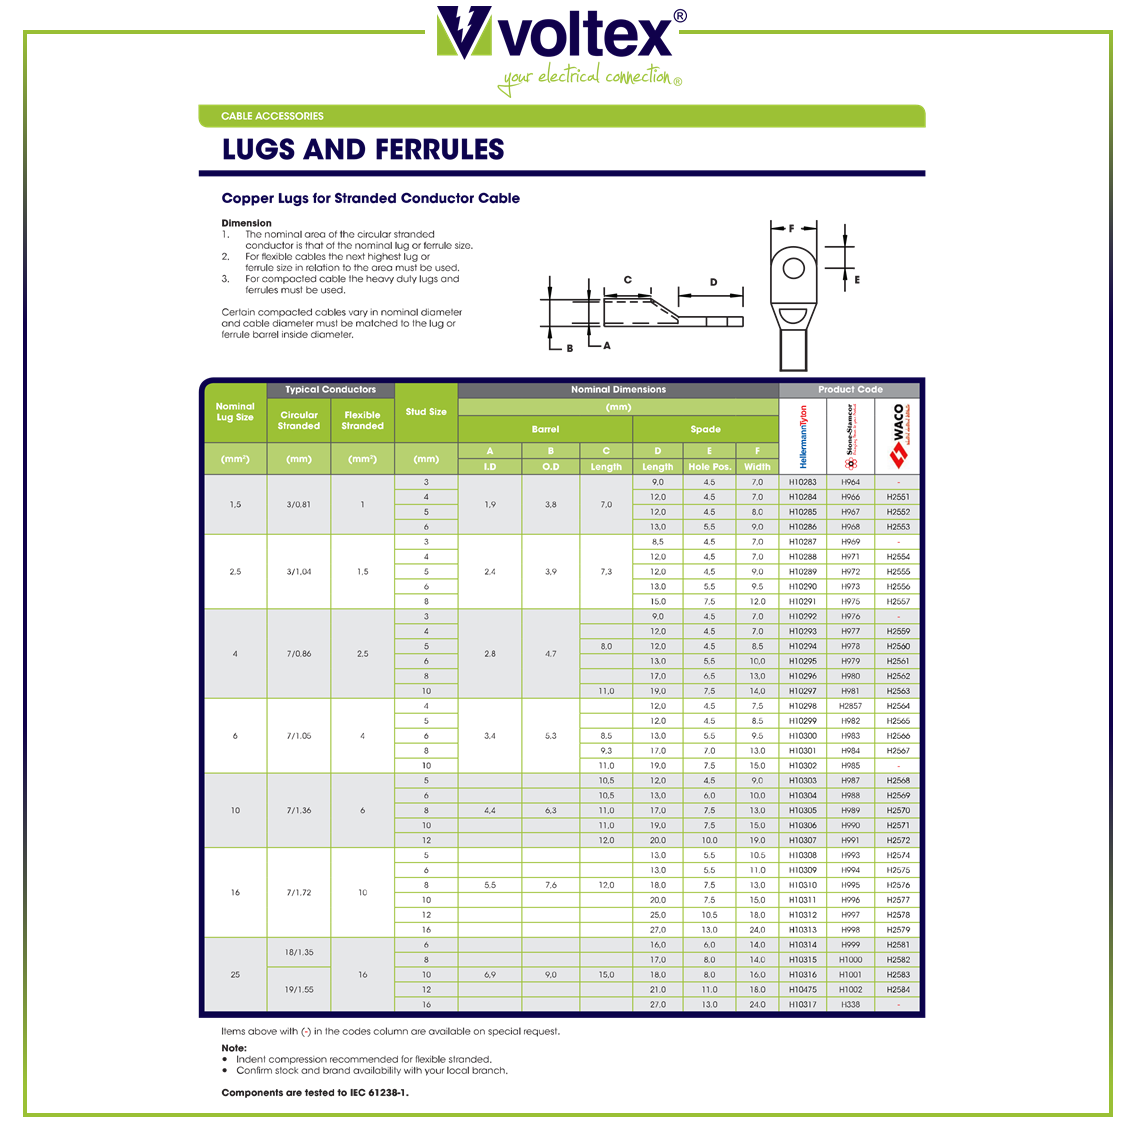 VOLTEX - Lugs and Ferrules Catalogue